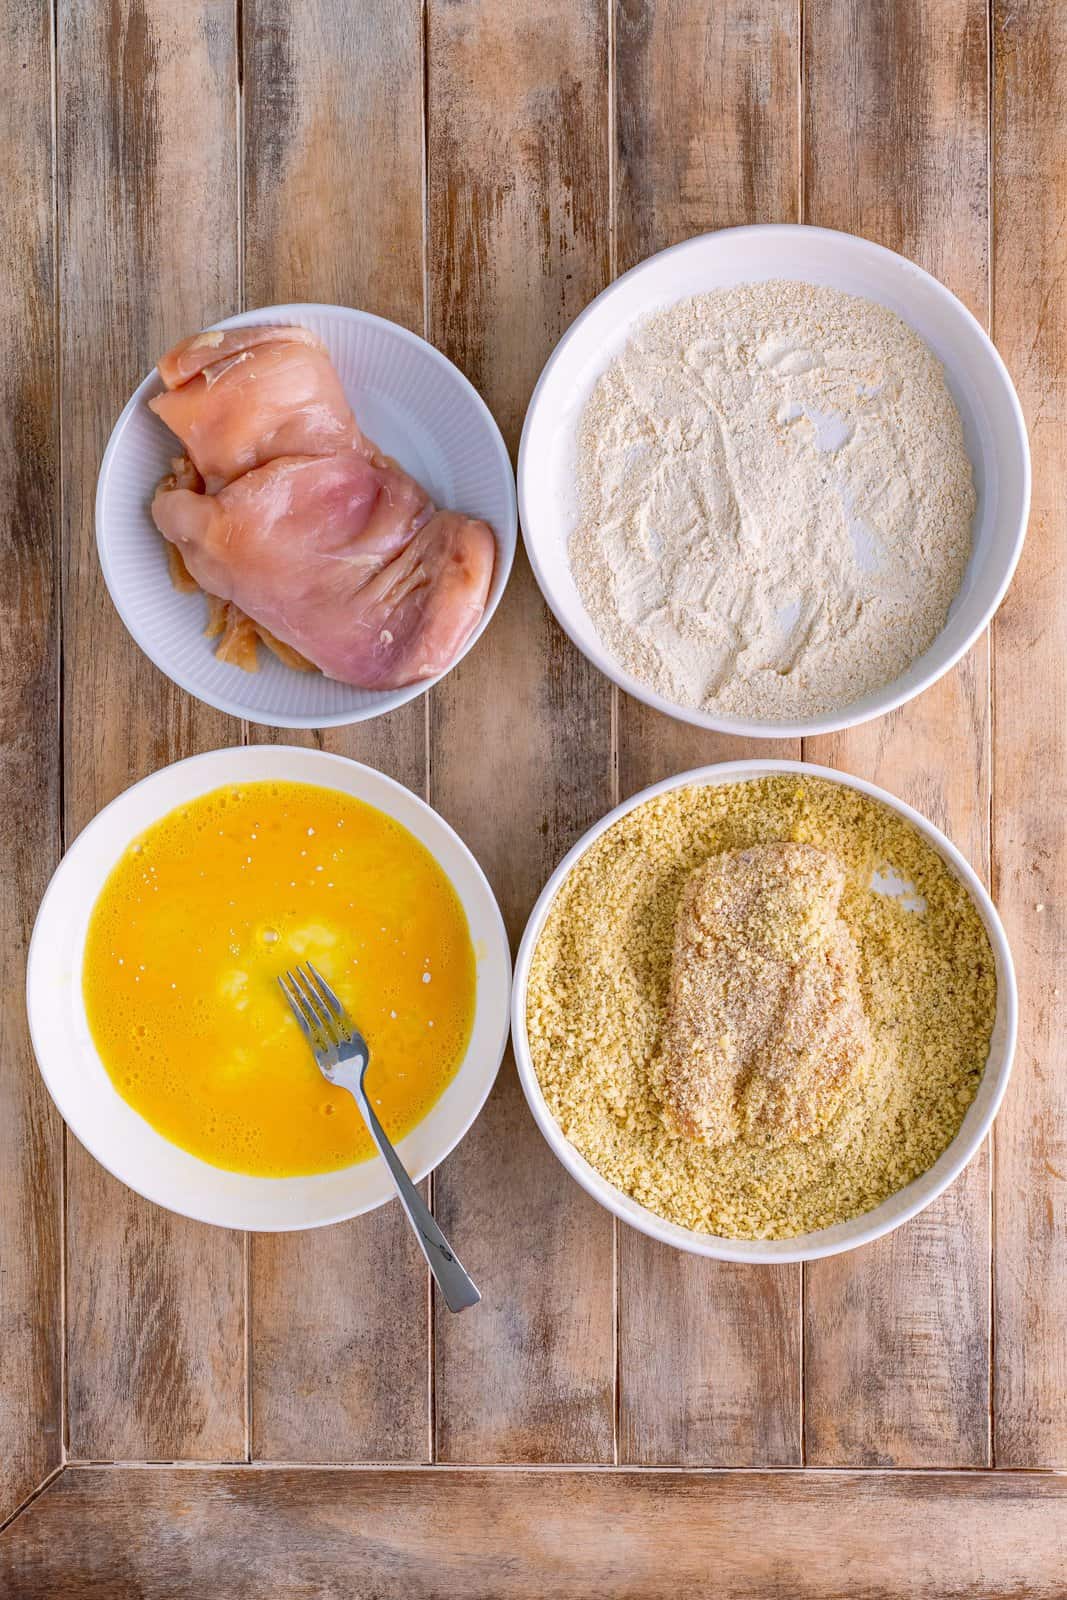 Chicken in a bowl, a bol with egg wash, a bowl with flour mixture, and a final bowl with chicken in the panko breadcrumbs.